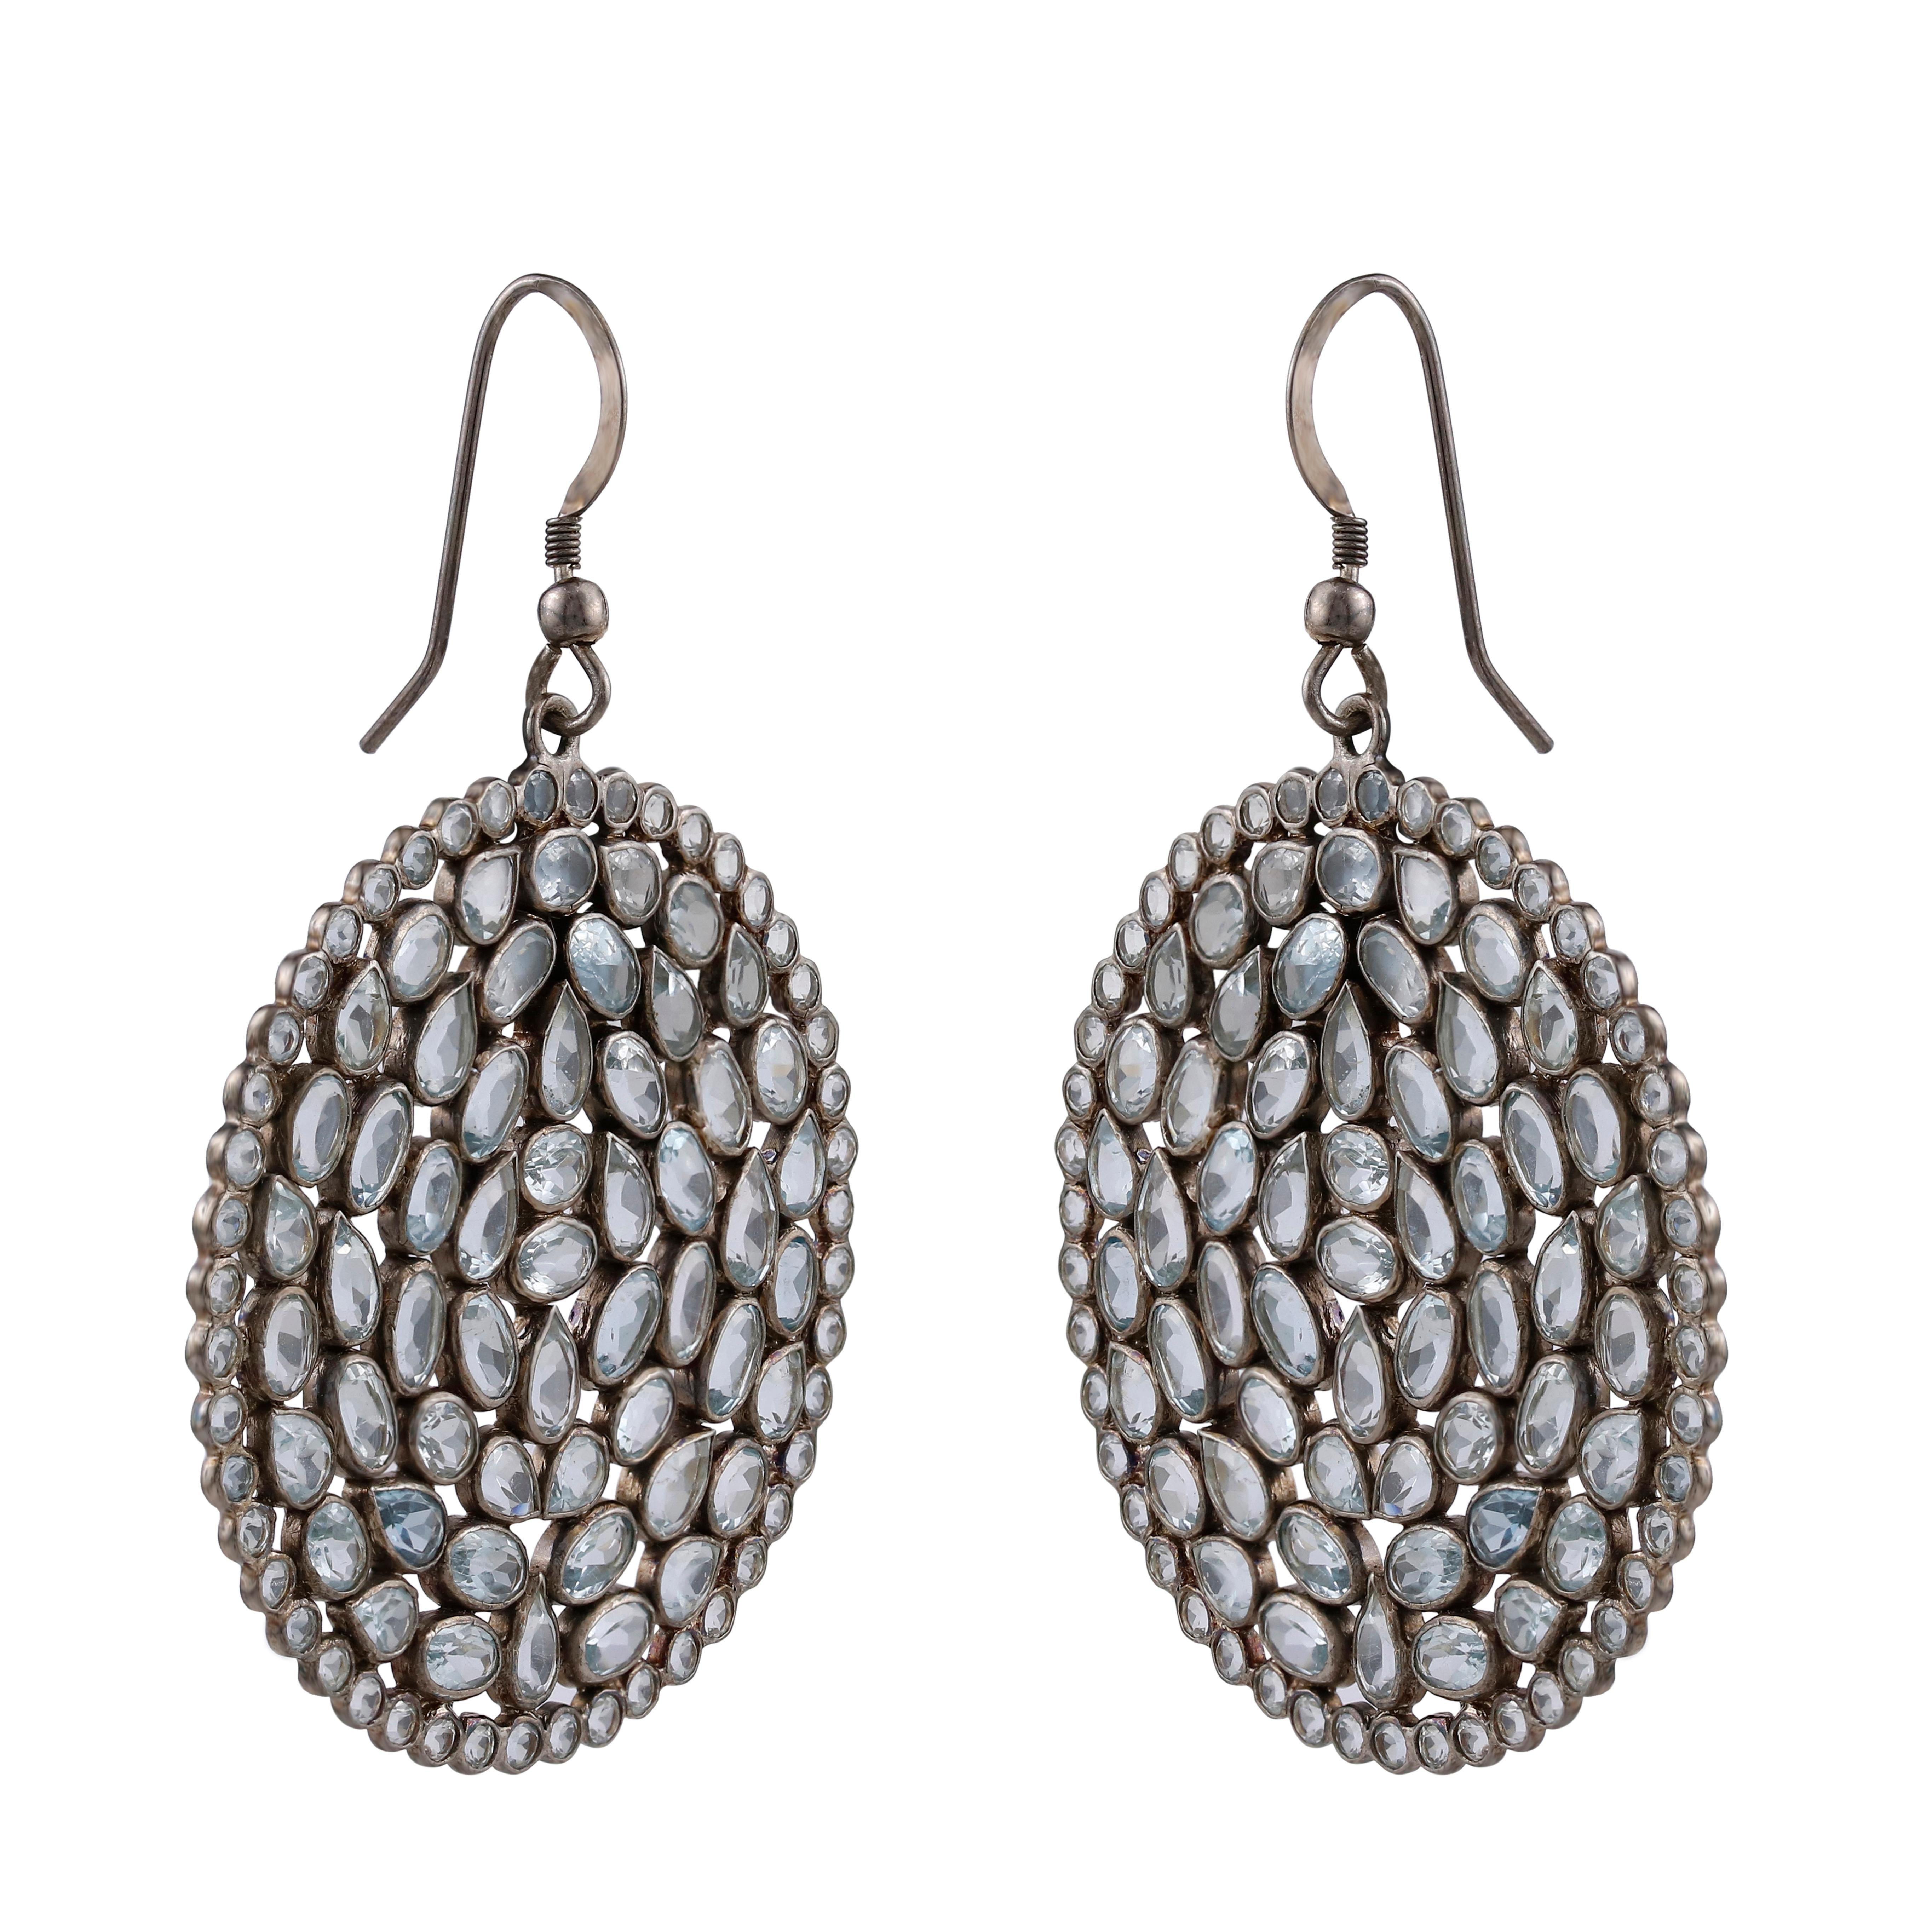 These Victorian handcrafted sterling silver drops include beautiful hues that you will like! The traditional circular design highlights beautiful sky blue topaz accented dangling from lever backs. For a gorgeous coordinated look, pair these with a